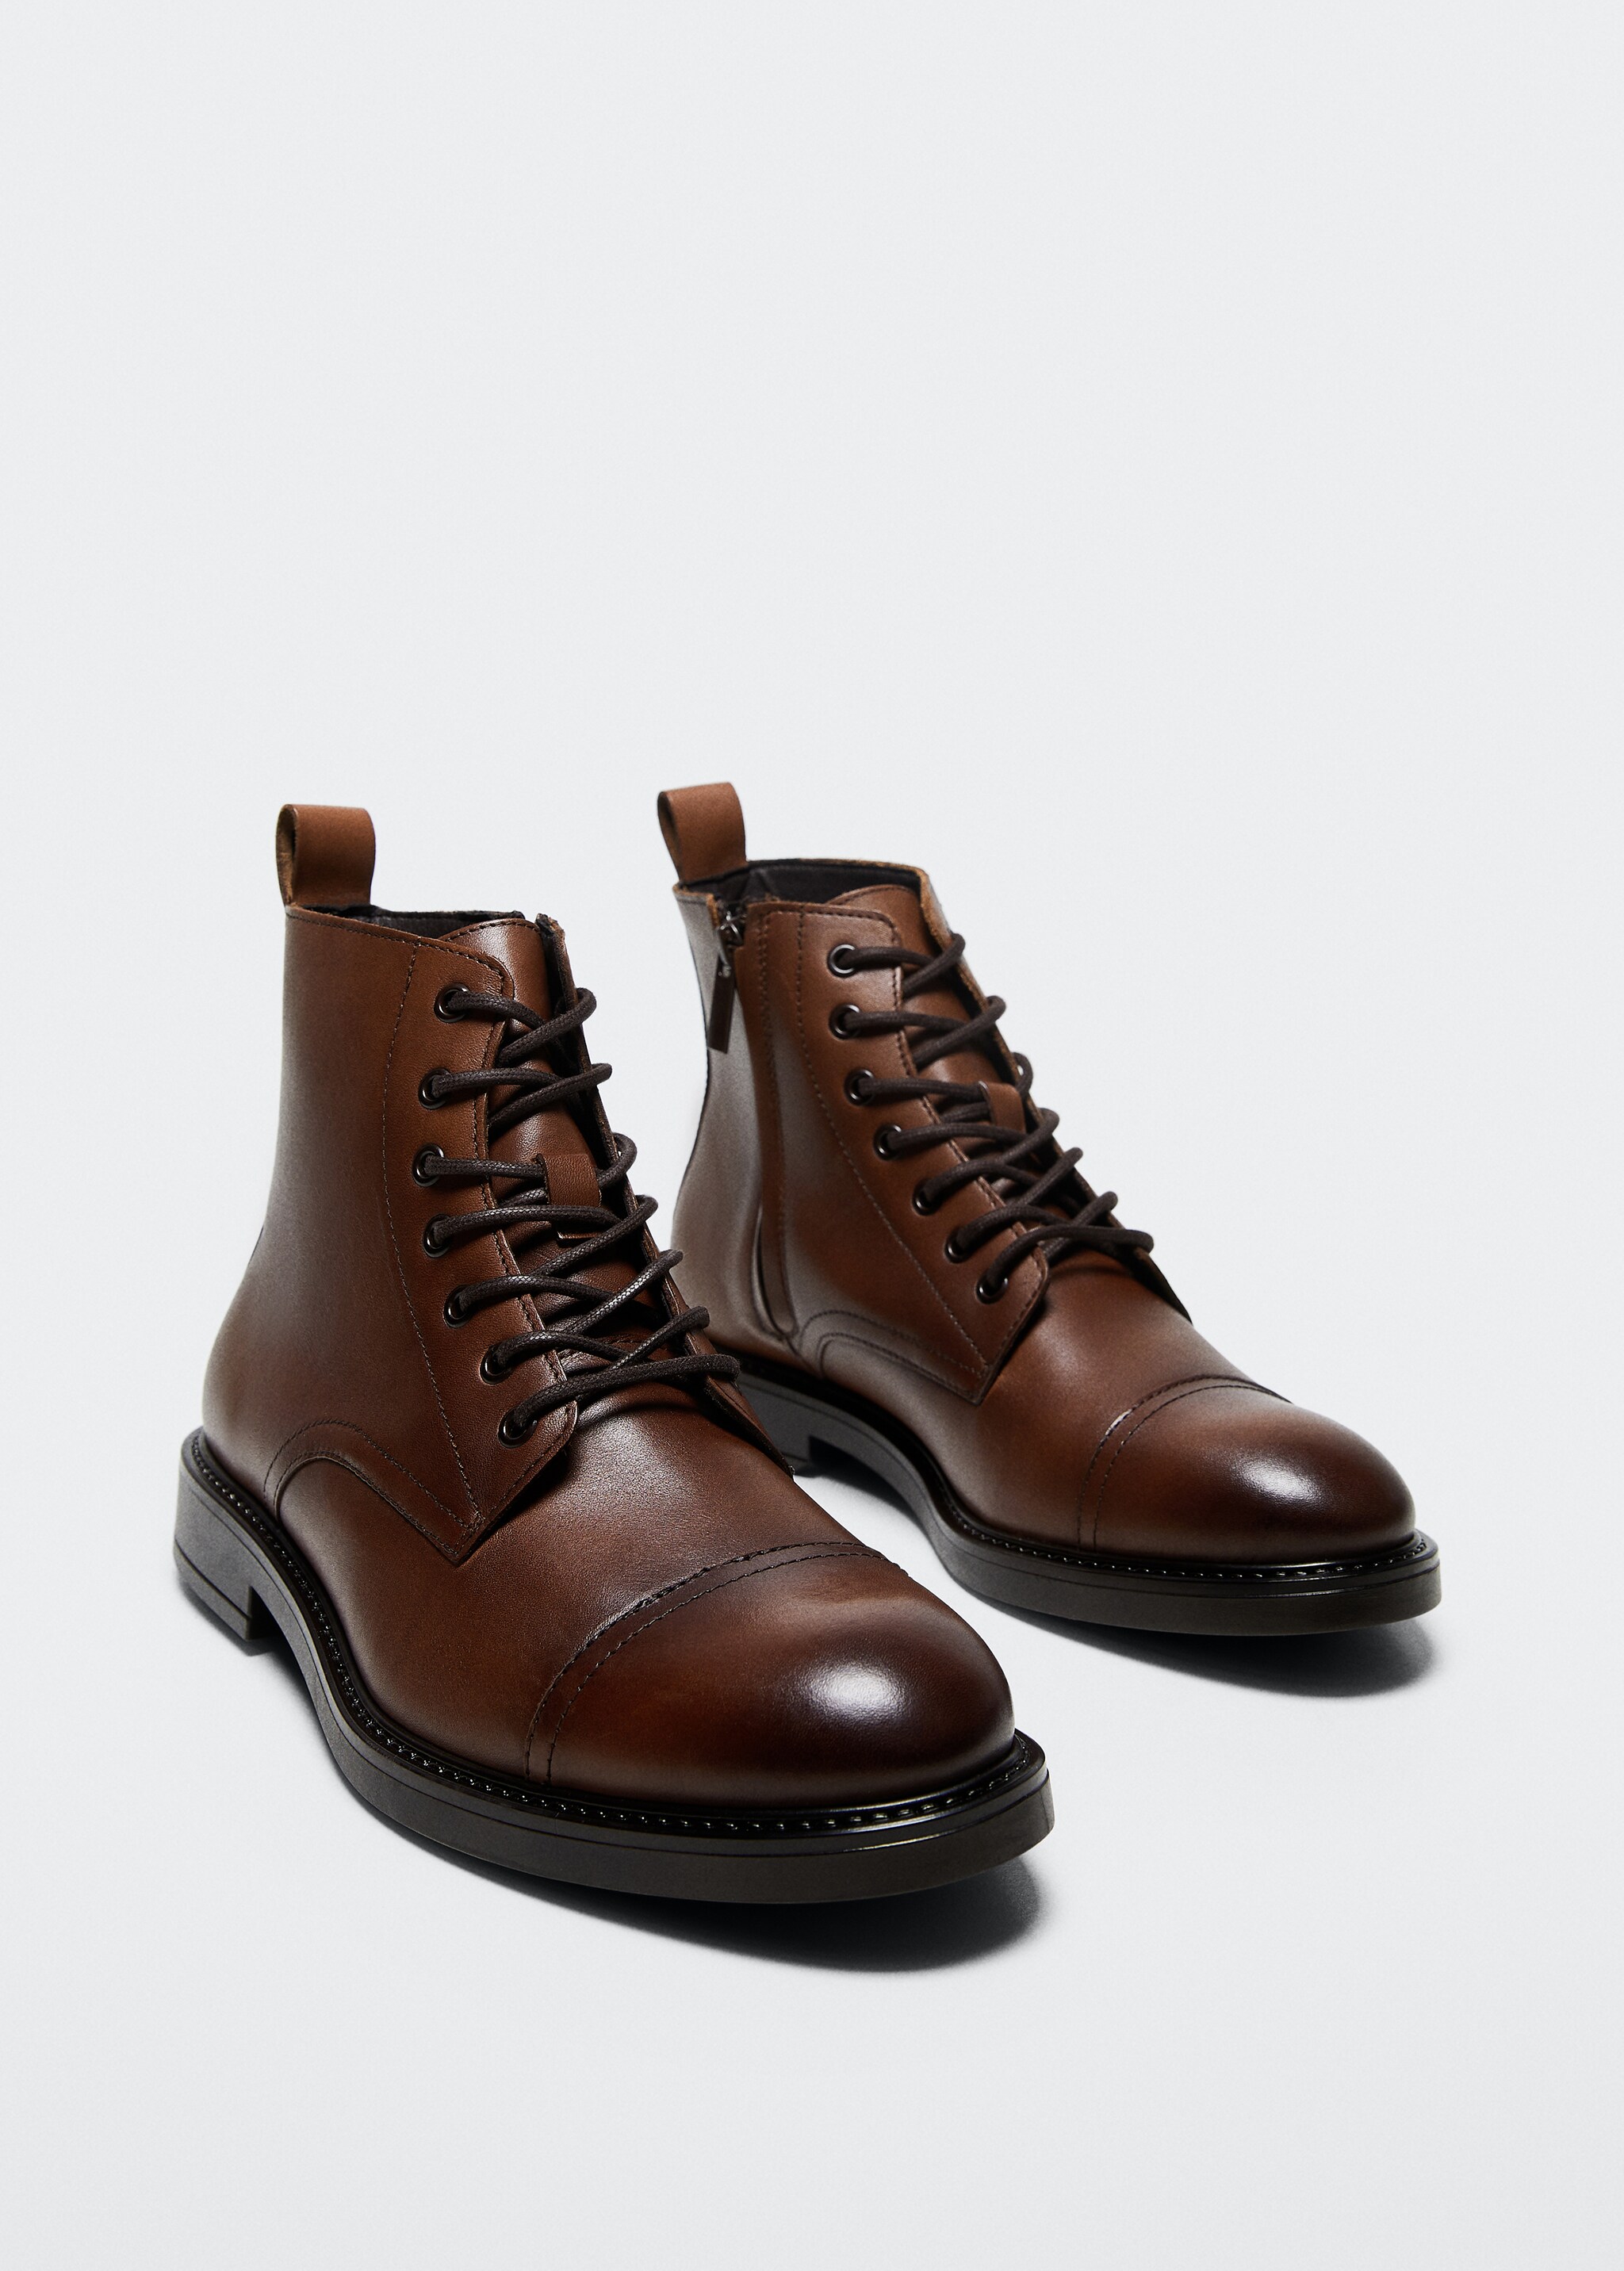 Lace-up leather boots - Medium plane